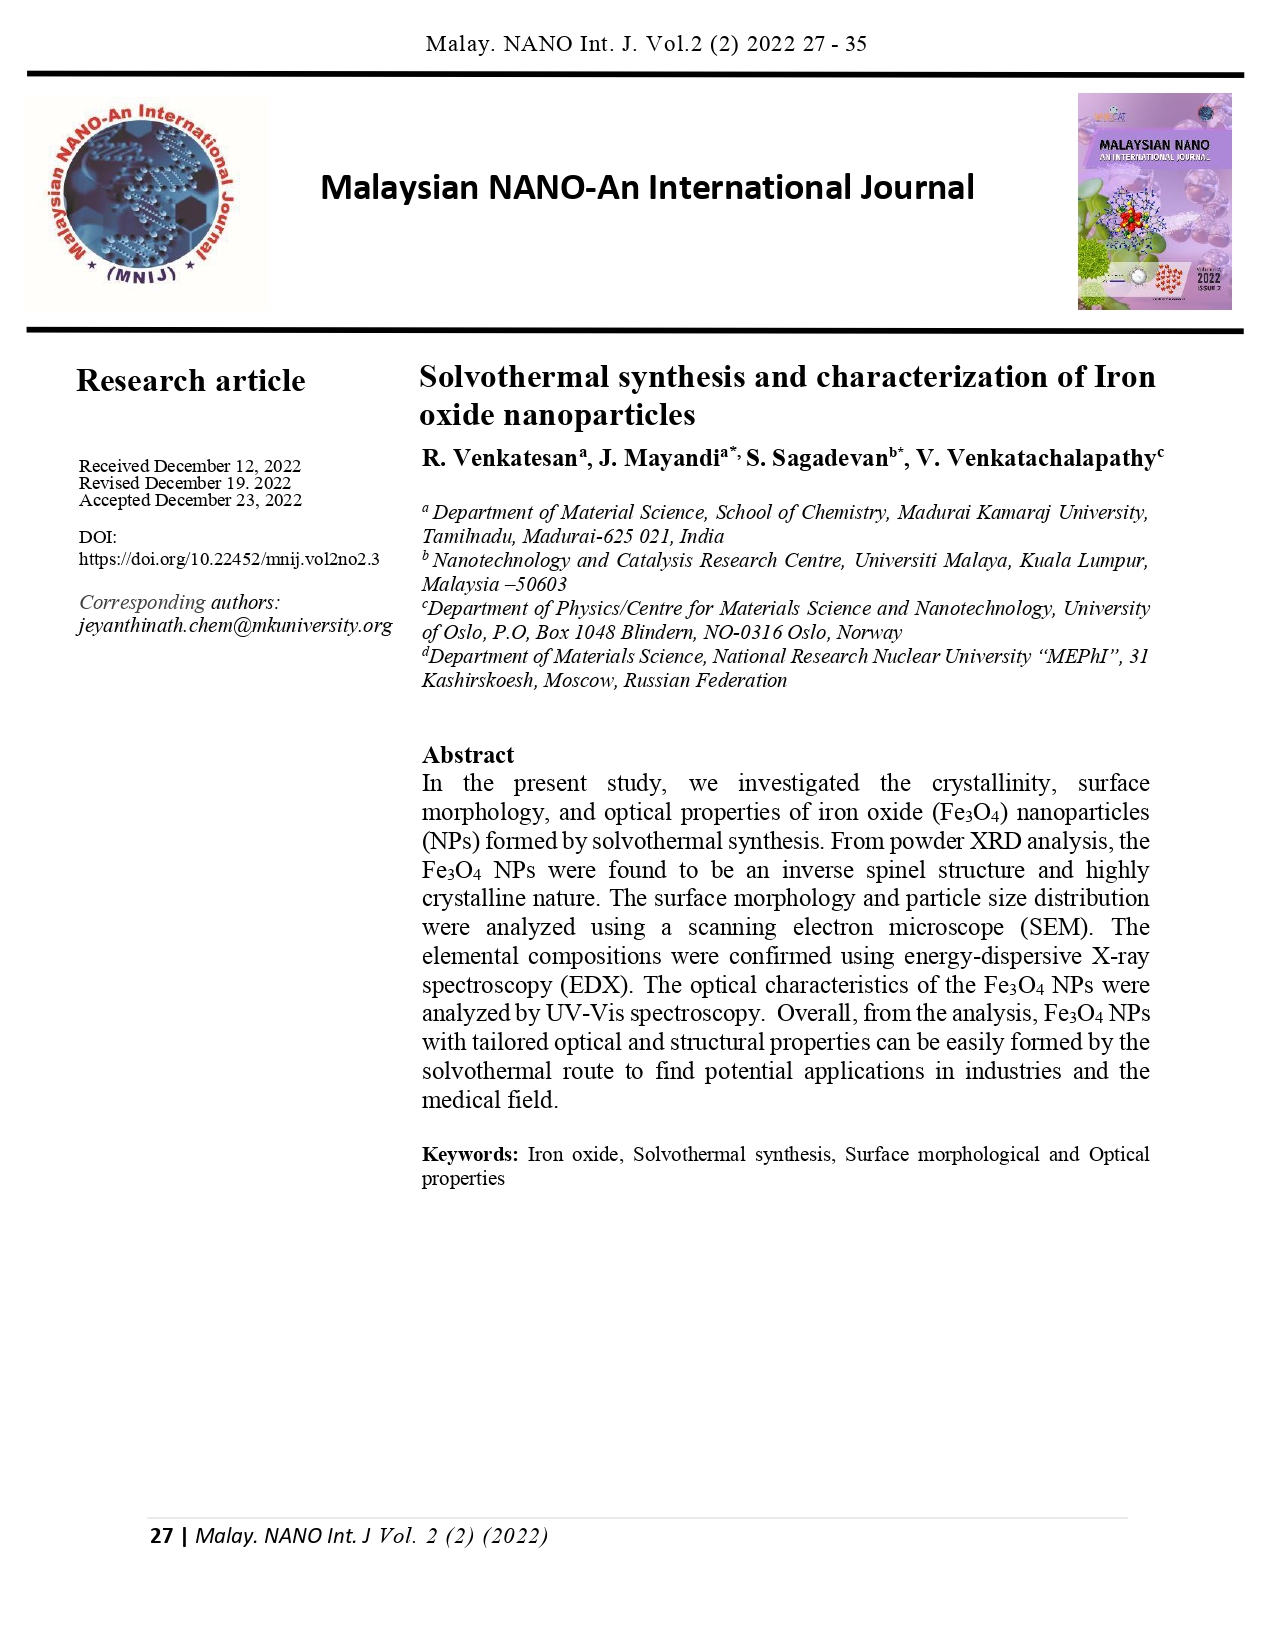 Solvothermal synthesis and characterization of Iron oxide nanoparticles